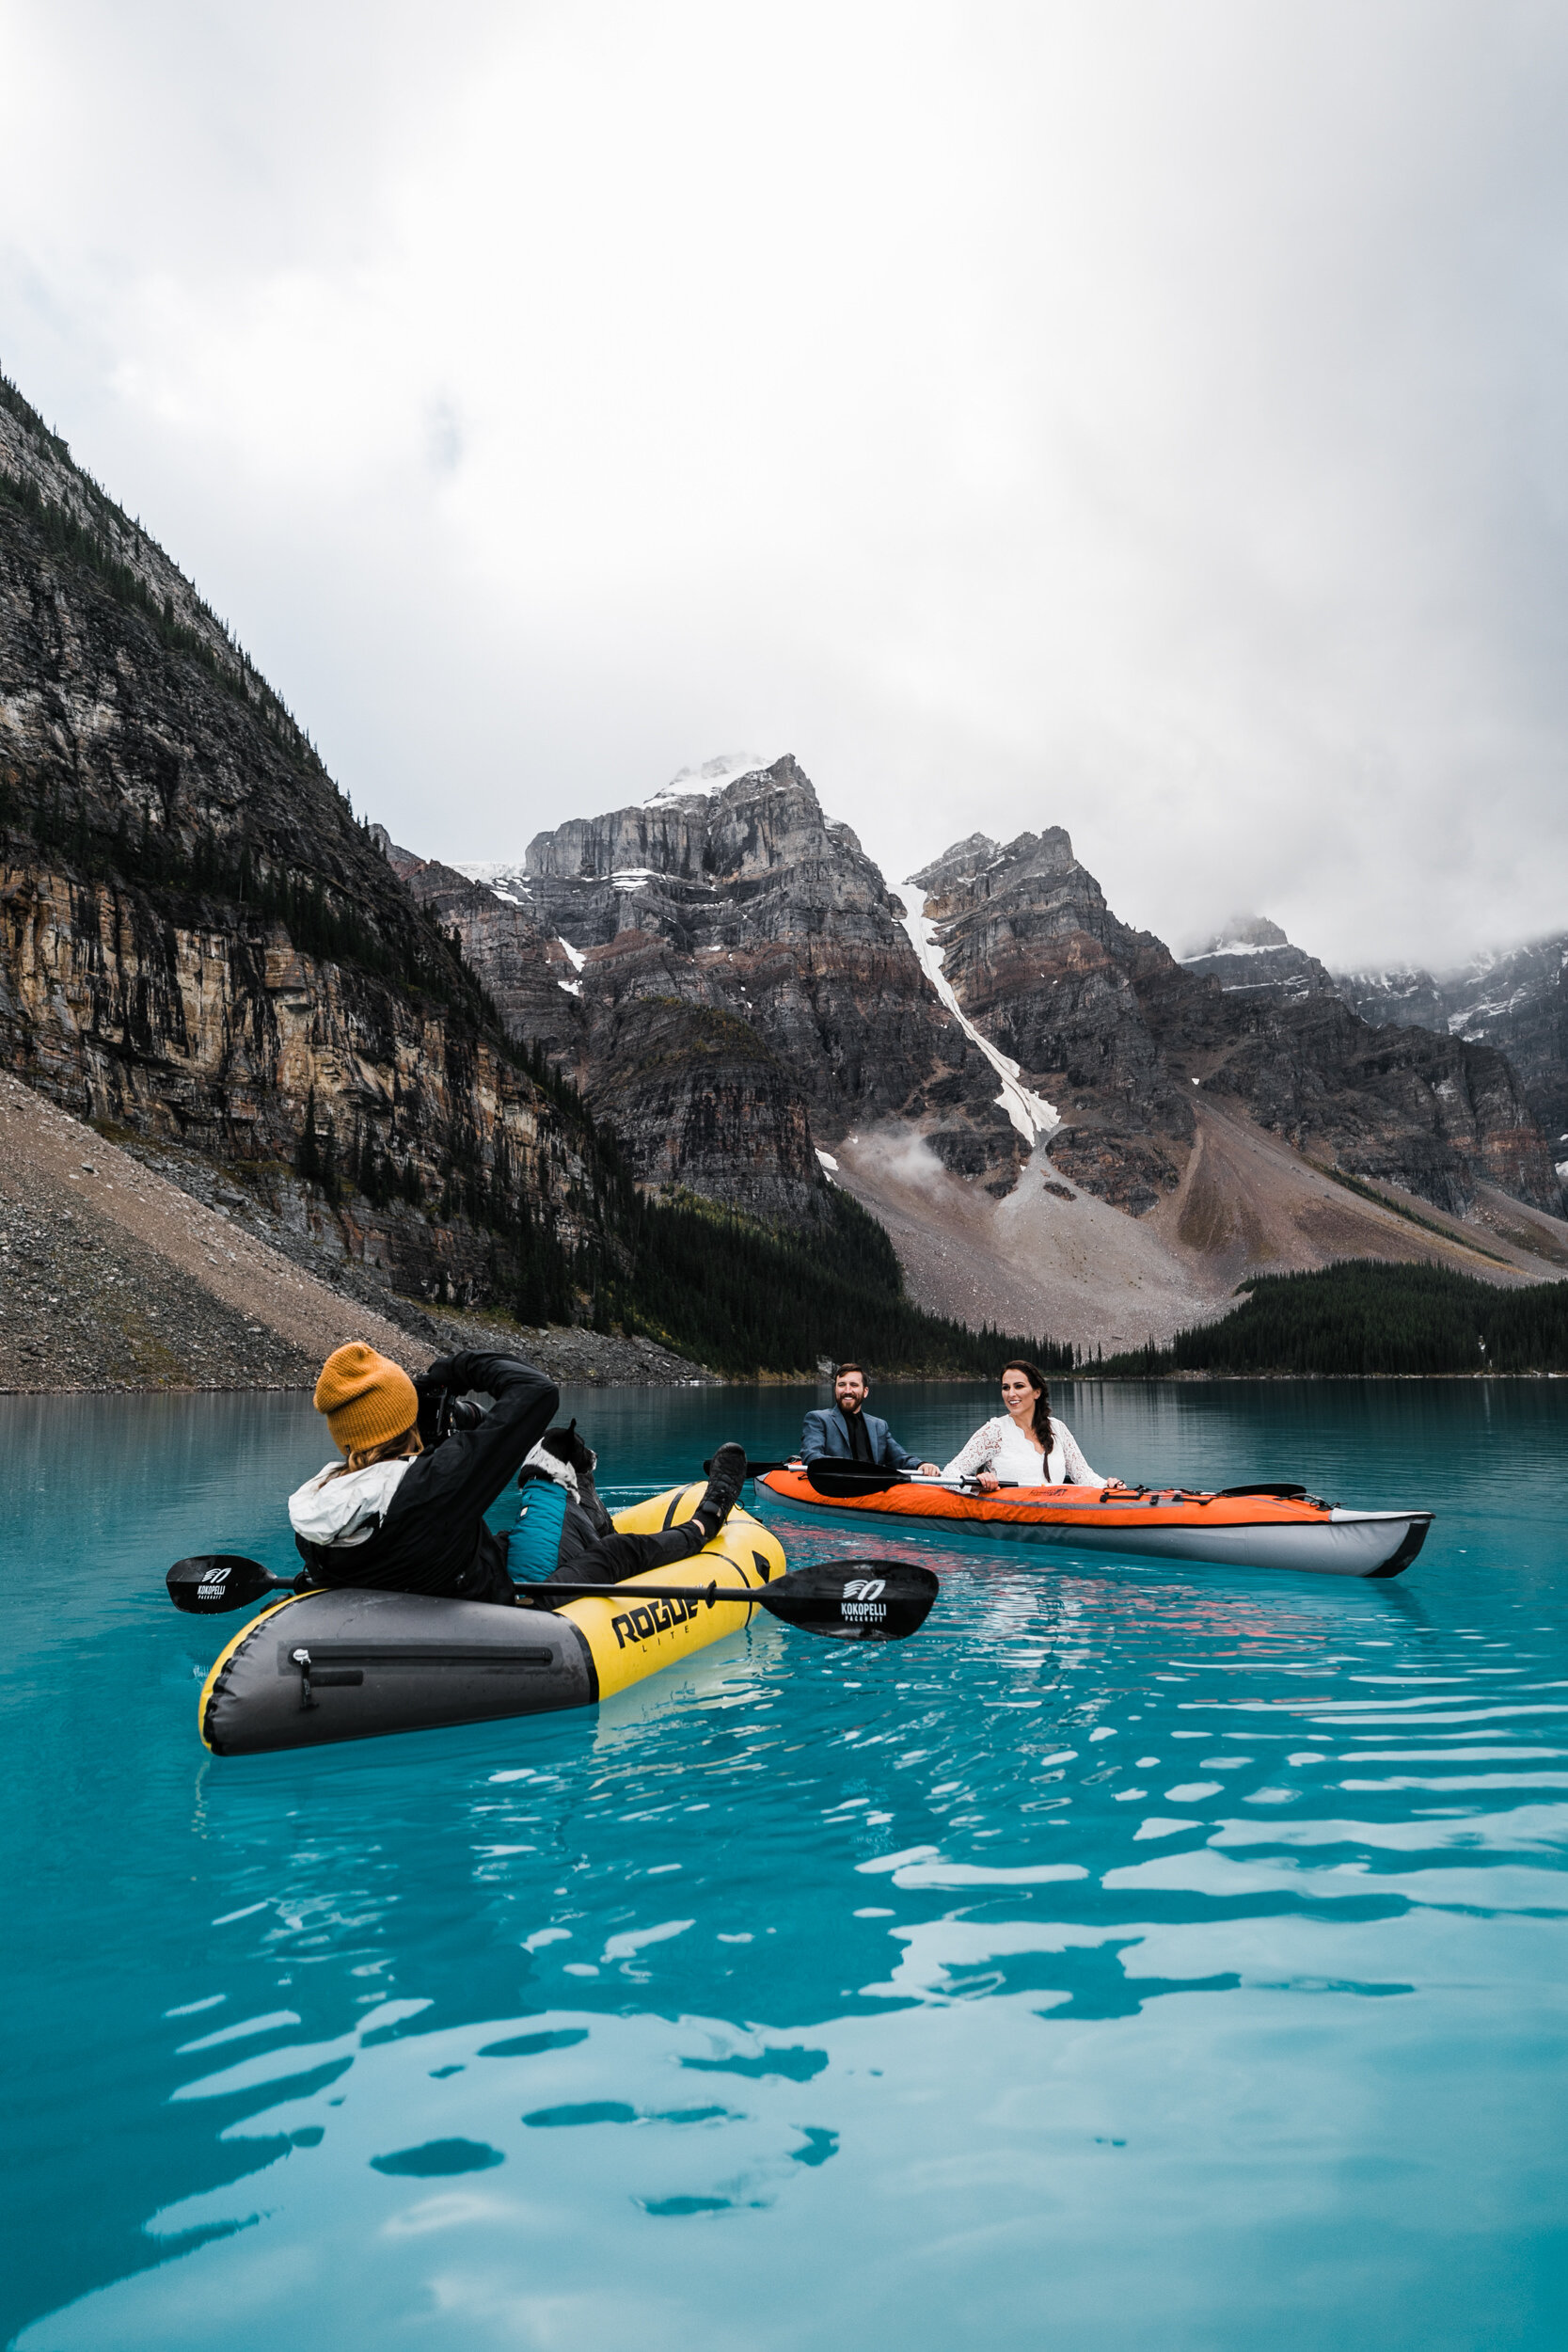 The Hearnes are Wedding Photographers in Canada | Banff National Park Adventure Elopements